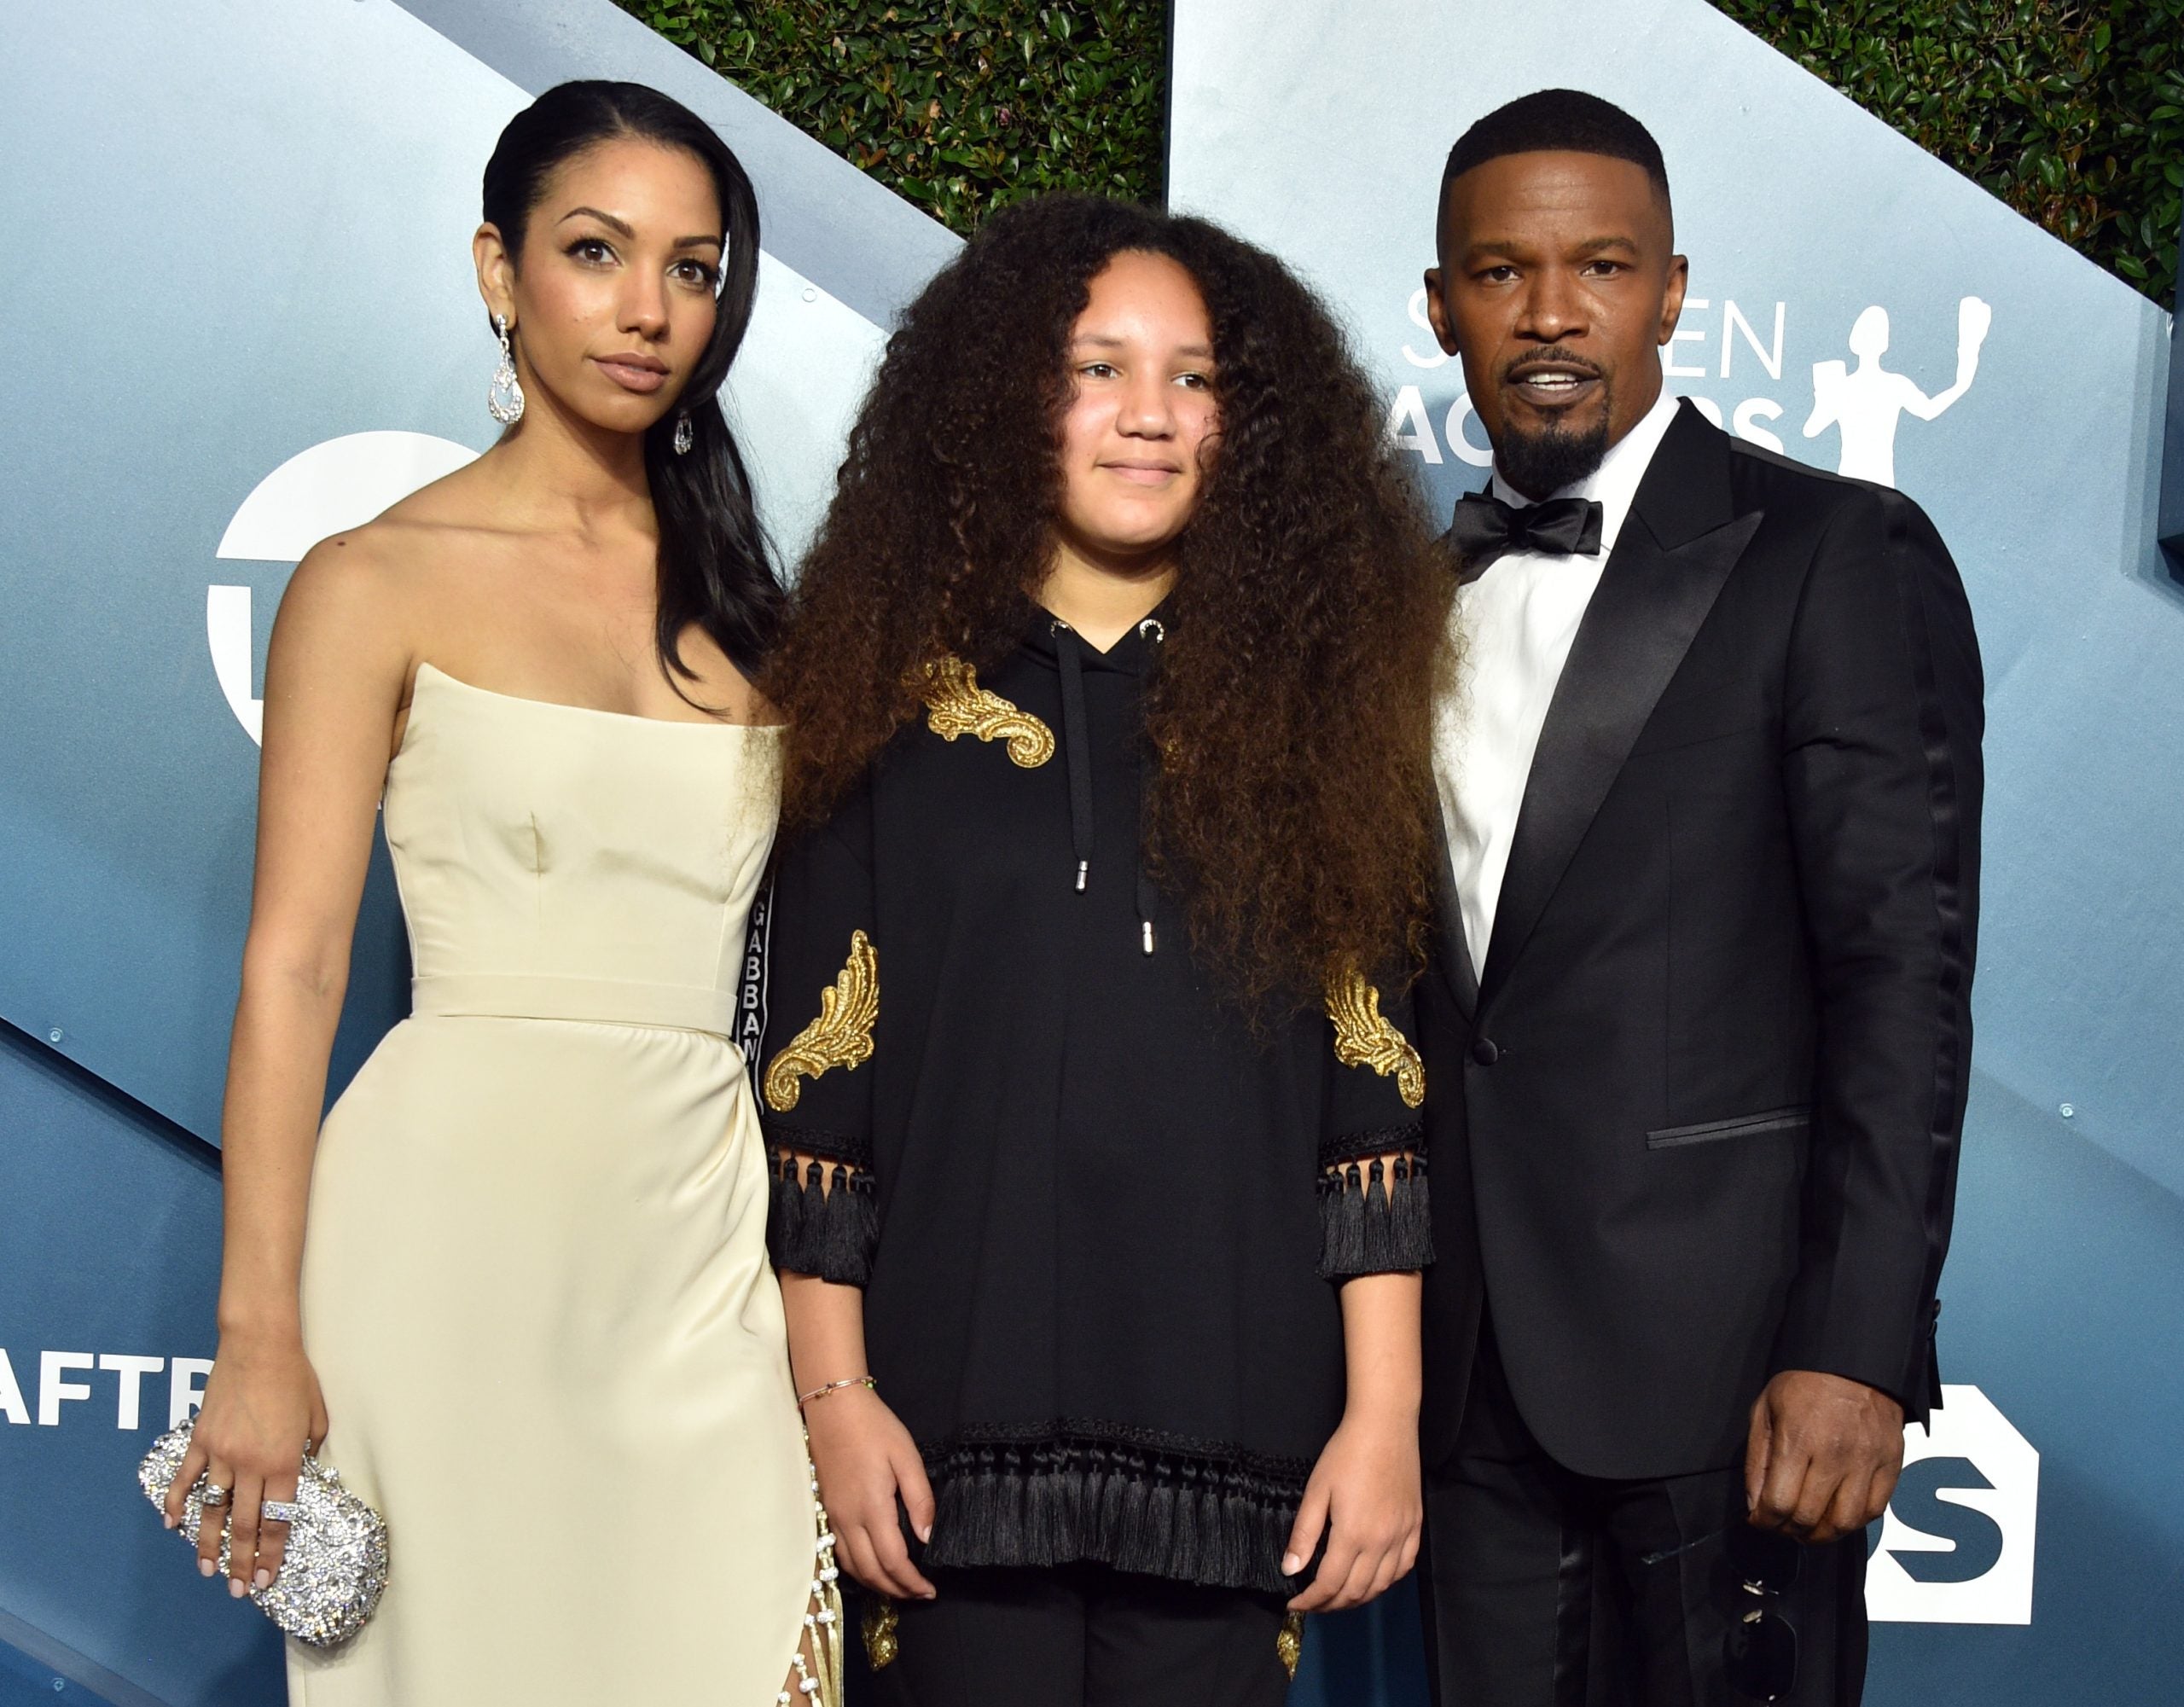 Jamie Foxx On Never Marrying And Why He’s Not ‘That Dude’ Just Because The Mothers Of His Children Aren’t Black